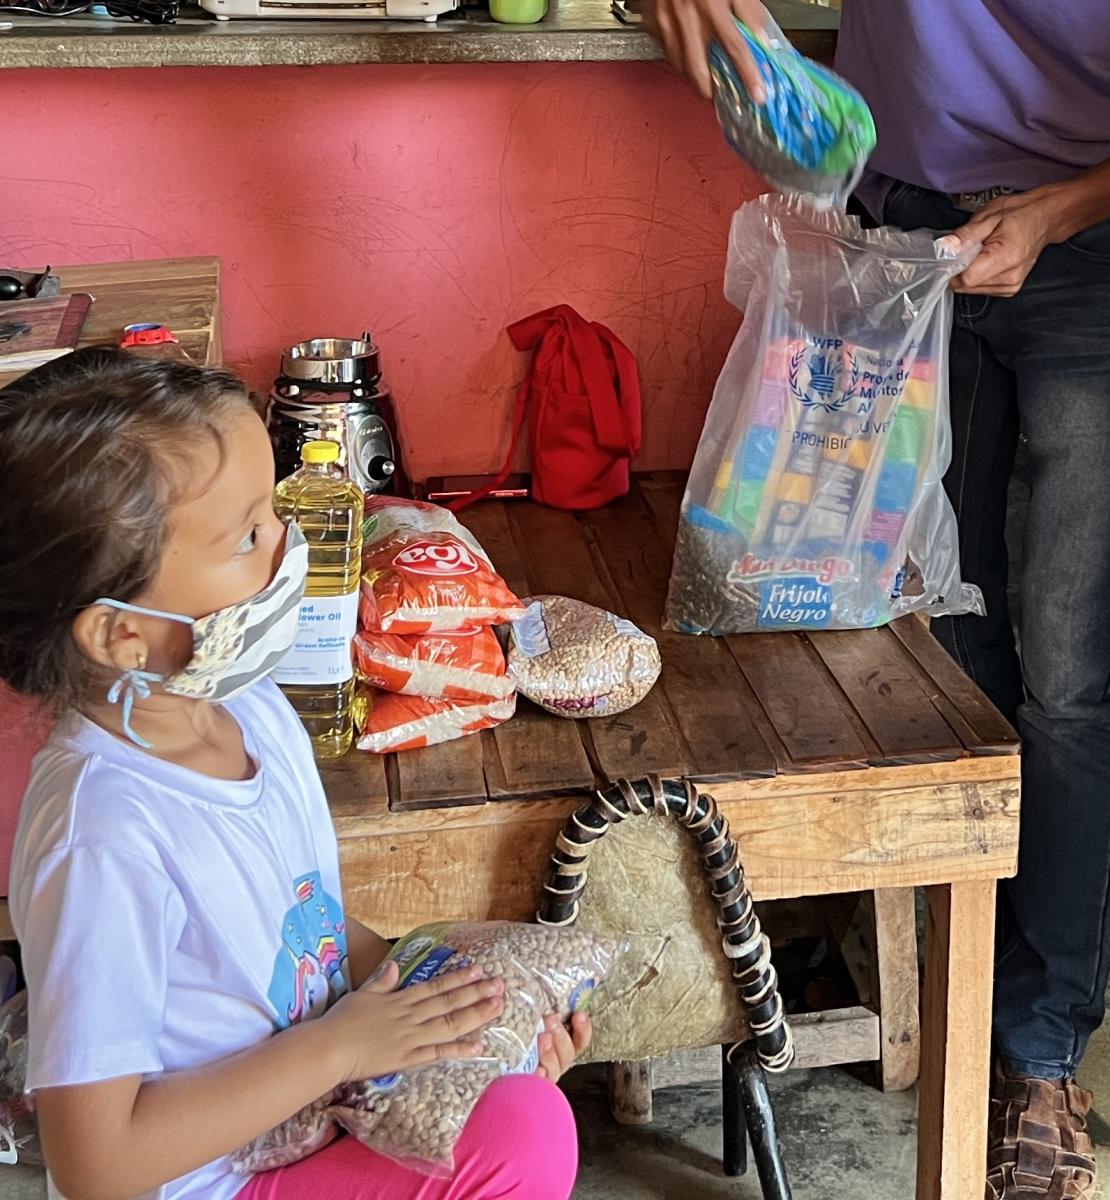 A small girl with a facemask holds a bag of beans while looking at two adults, and in the background there is a table with food on it.